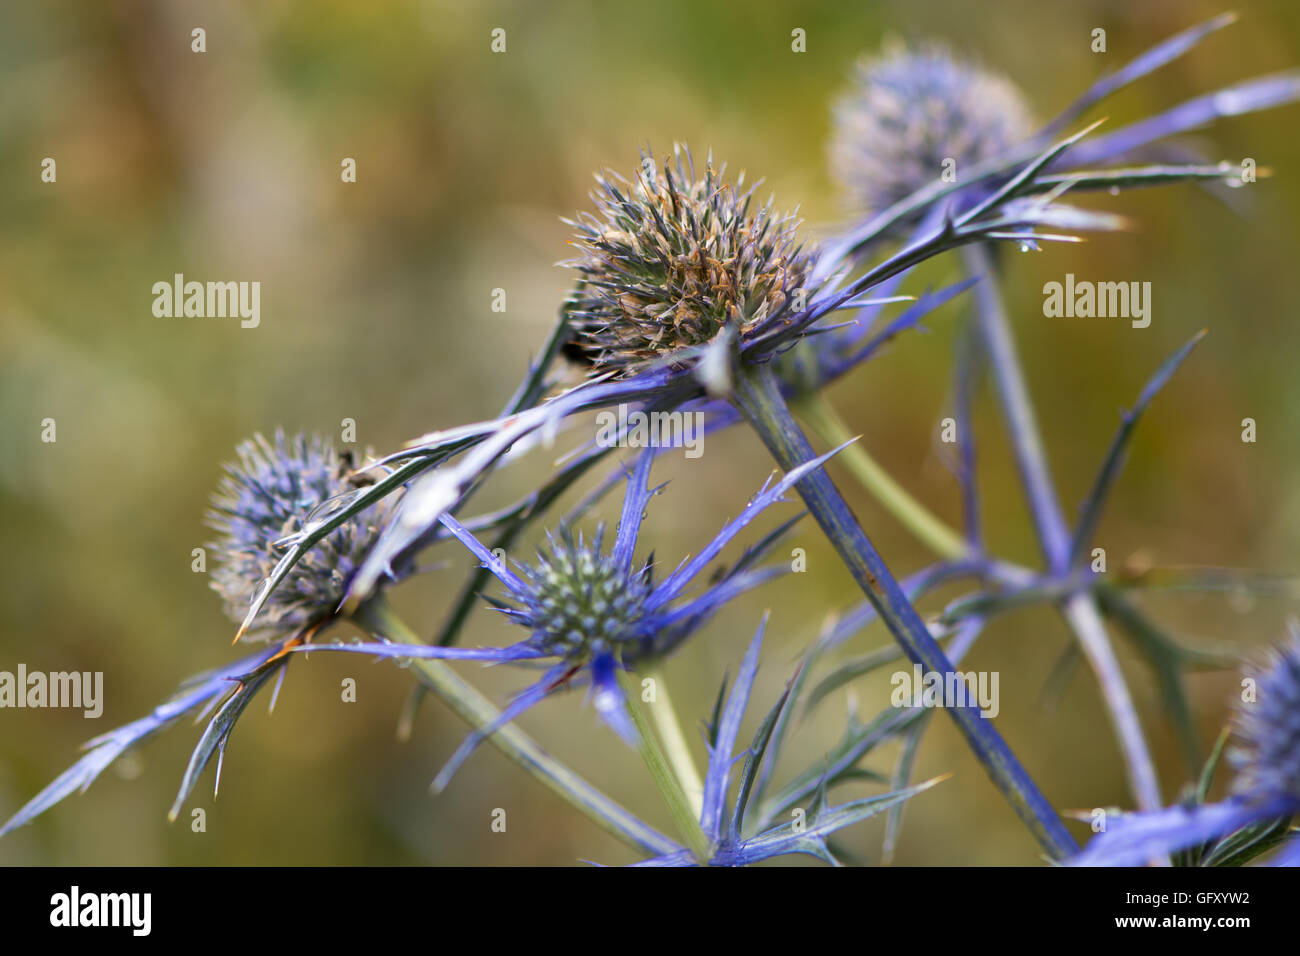 Mediterranean sea holly (Eryngium bourgatii). Spherical blue flowers with spiny bracts of flowering plant in the family Apiaceae Stock Photo